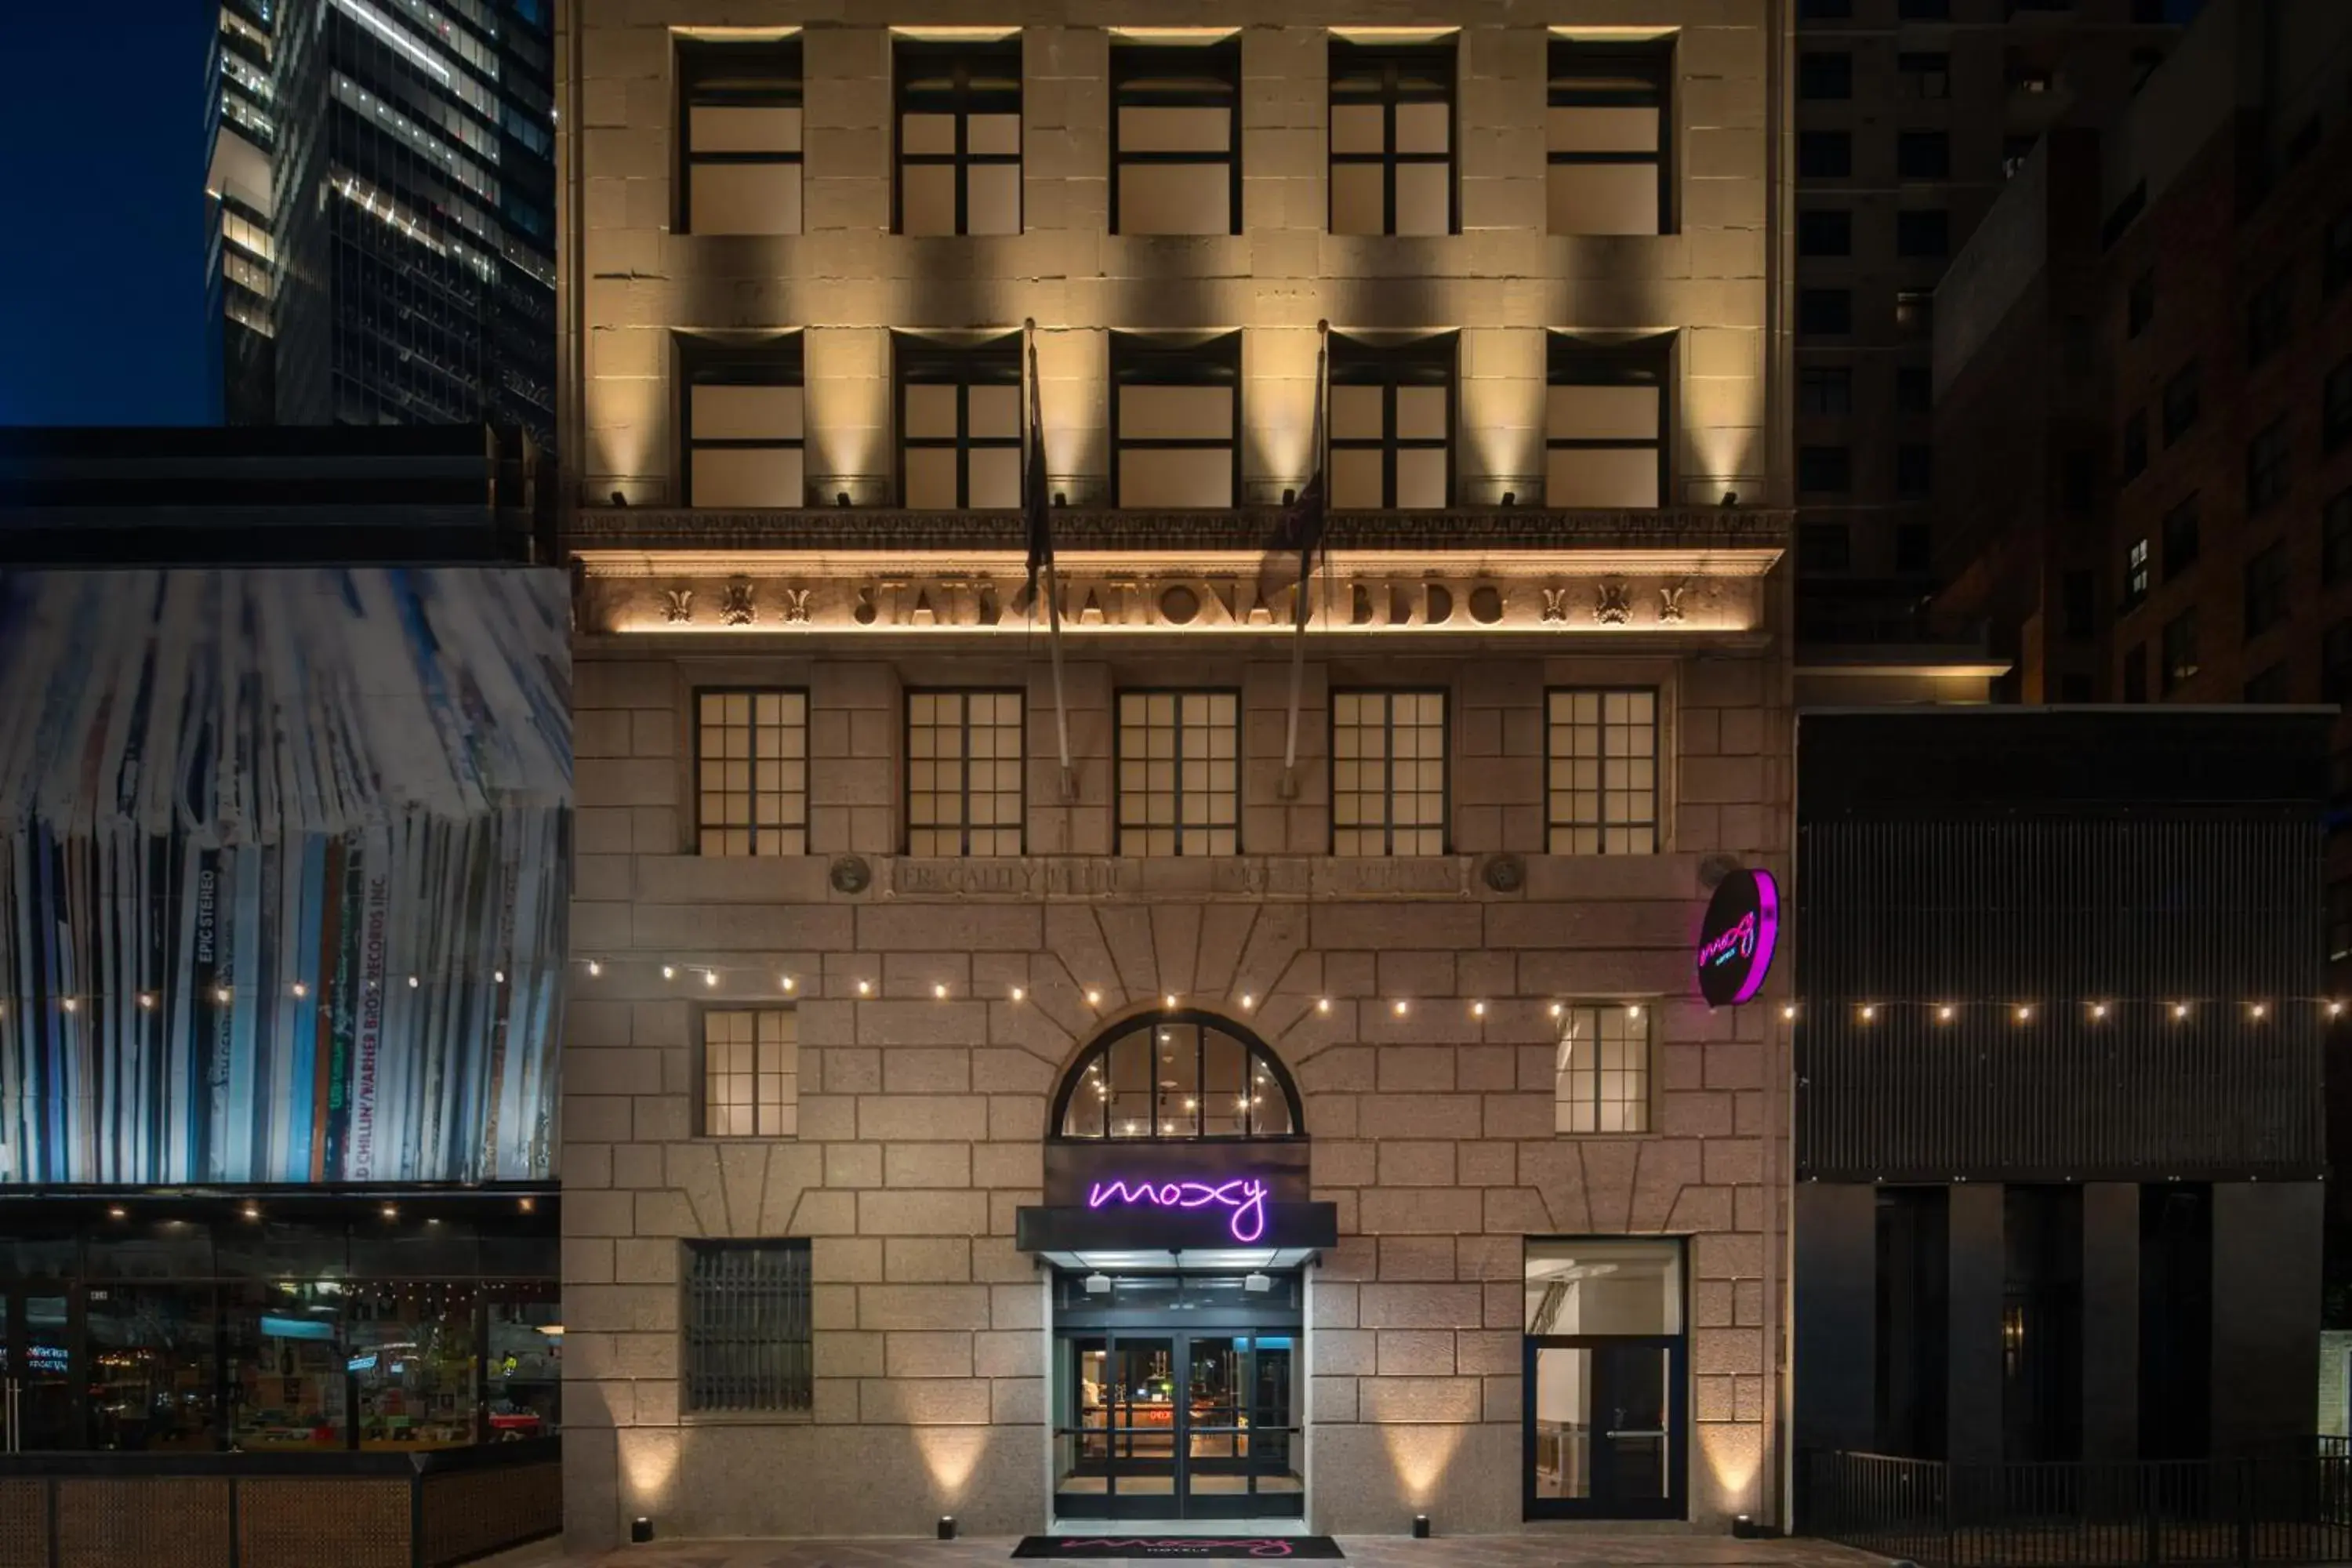 Property building in Moxy Houston Downtown